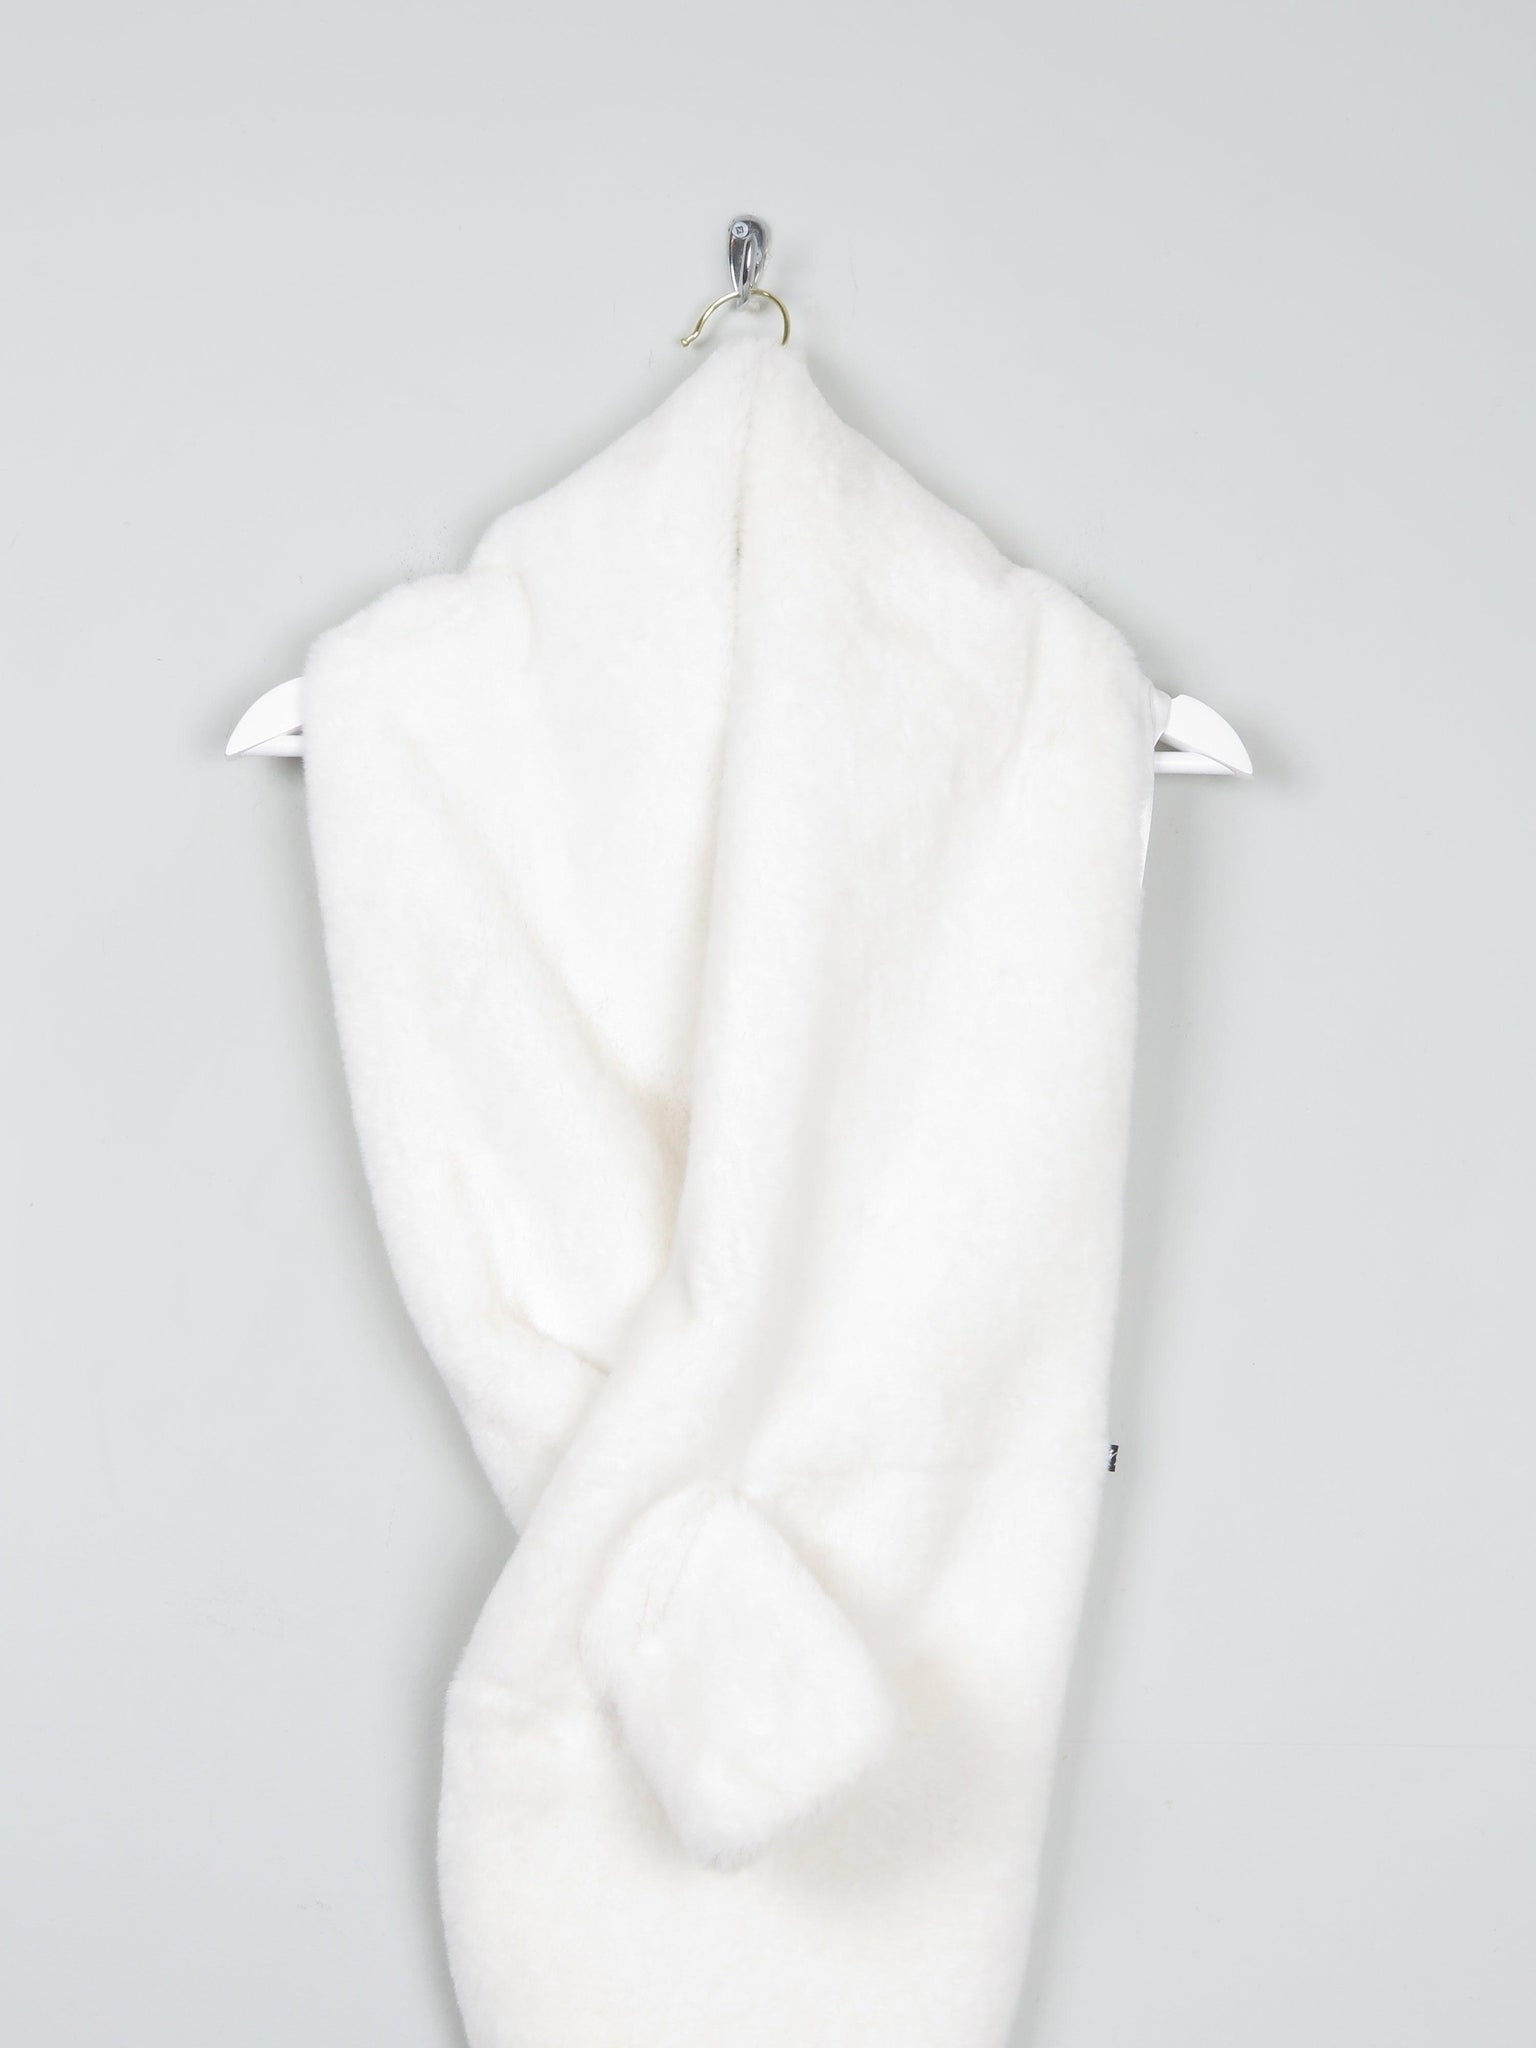 New Ivory Soft Faux Fur Wrap/Scarf - The Harlequin